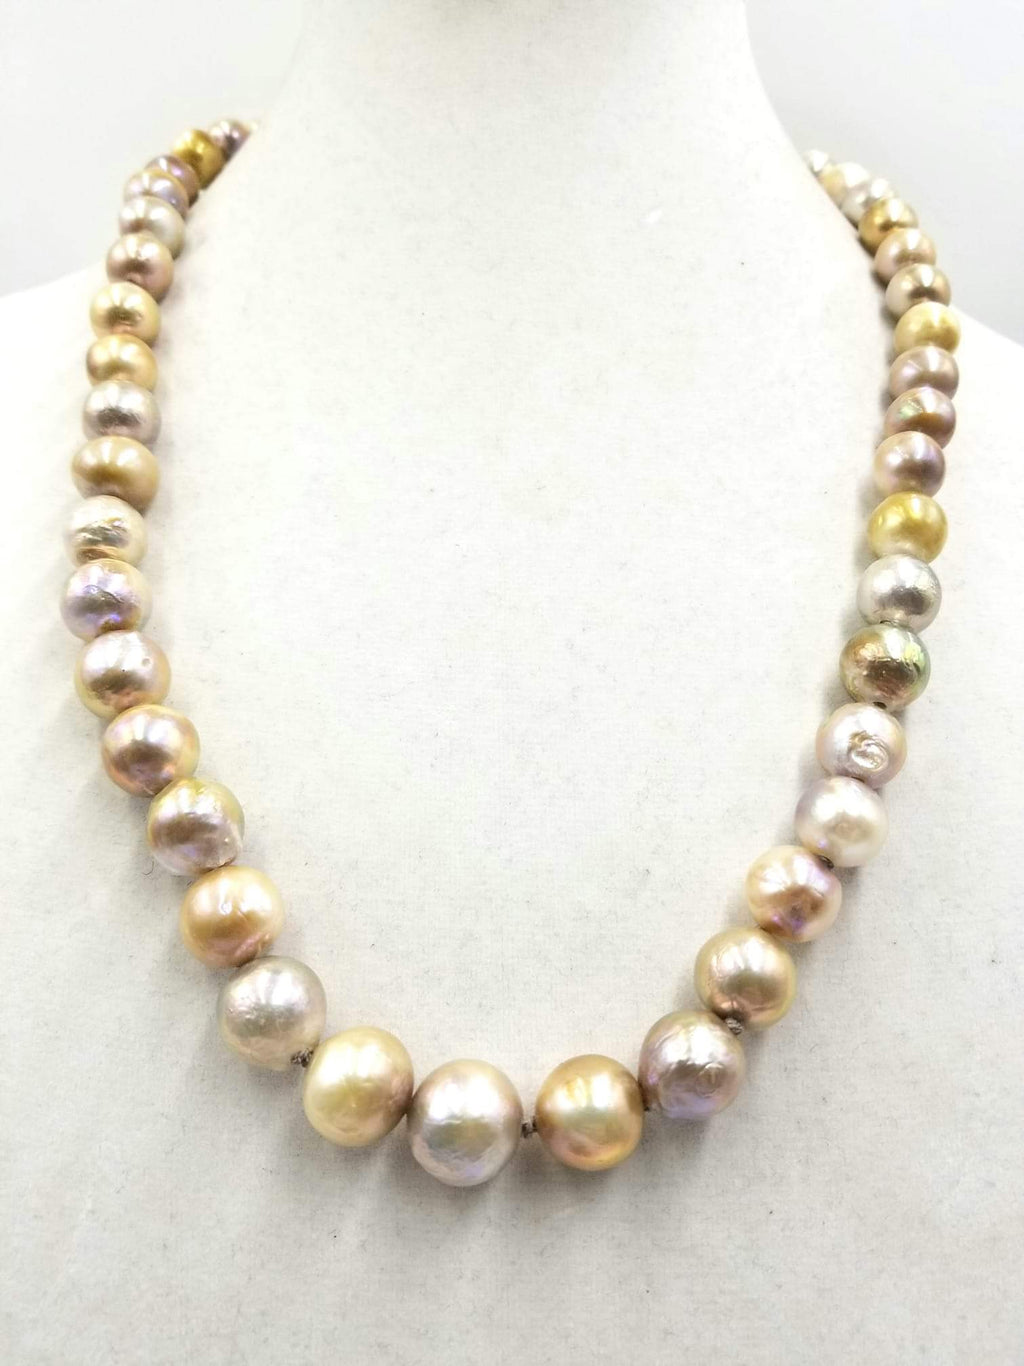 Splendid graduated South Seas Pearl necklace with 14K yellow gold clasp. hand-knotted with dove gray silk.